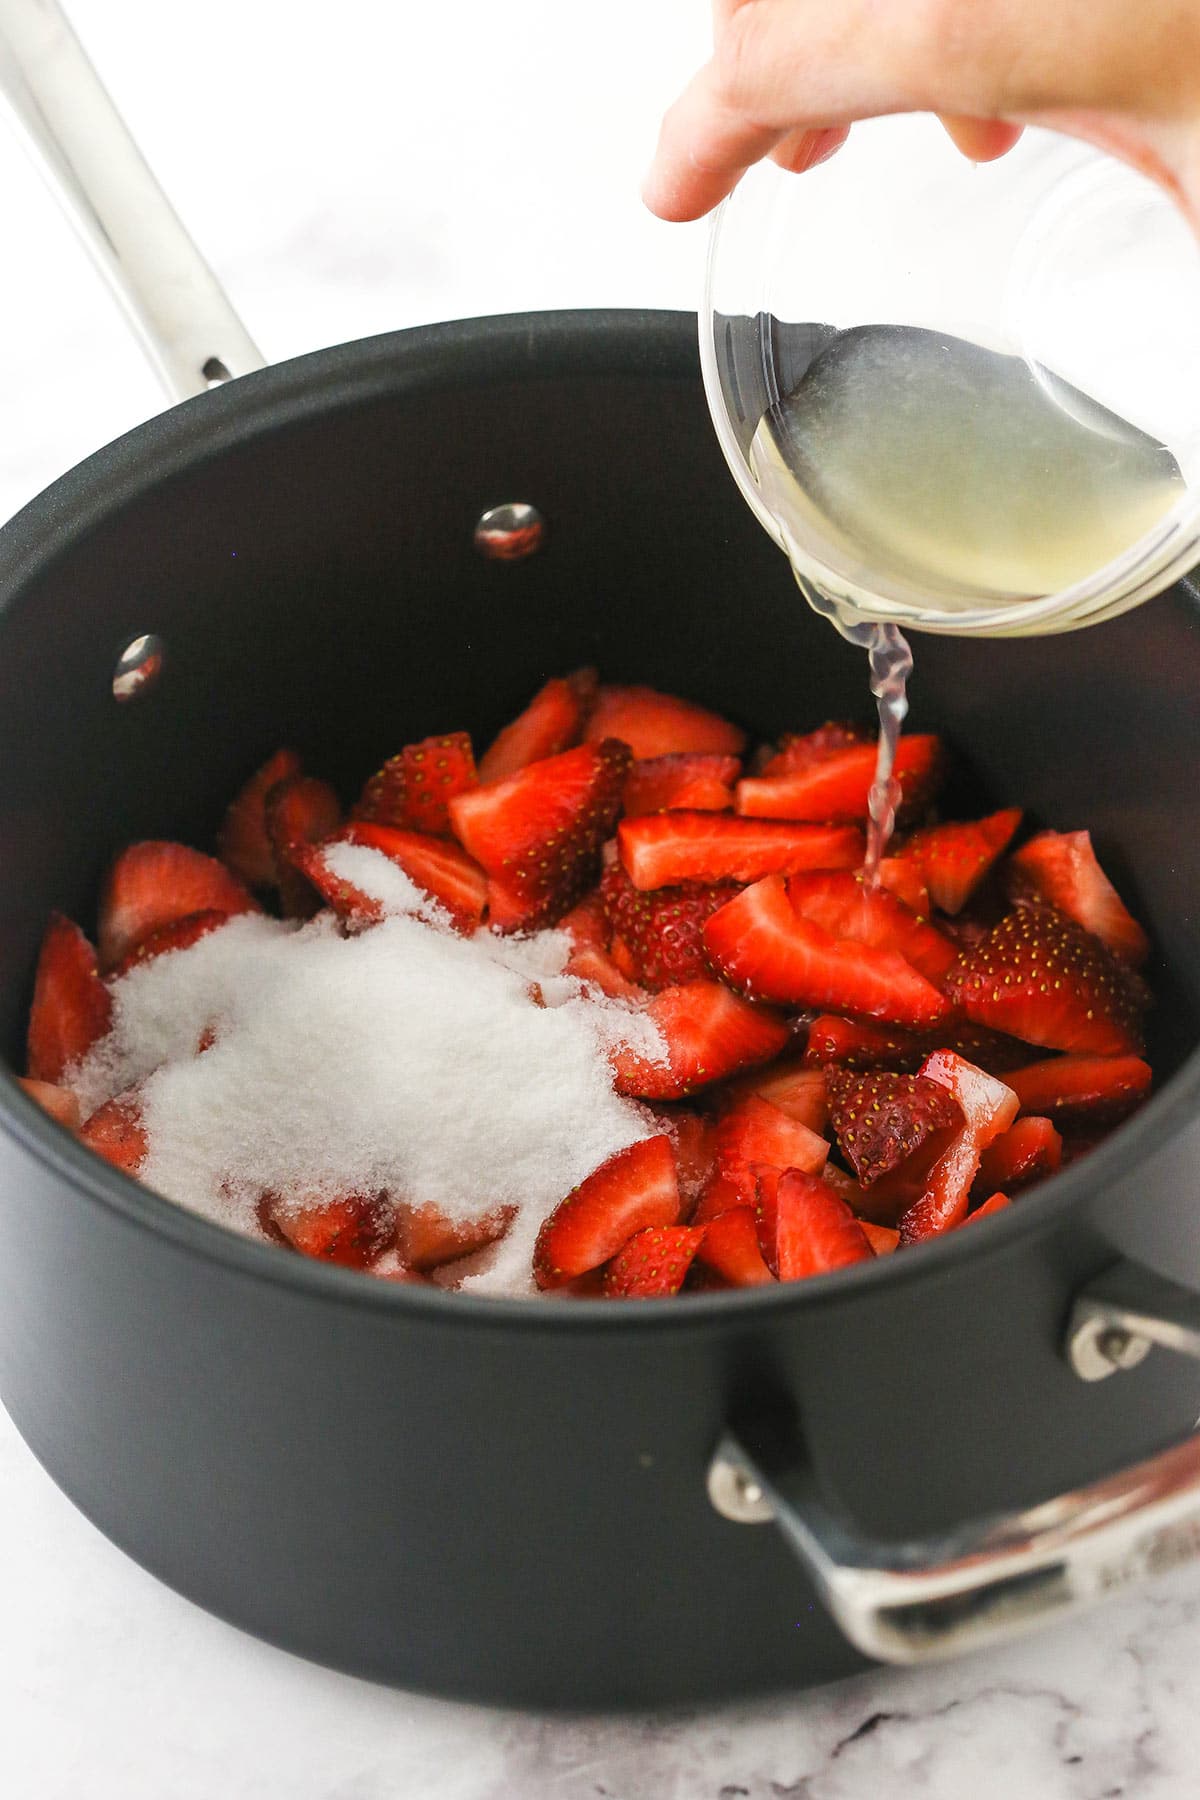 pouring lemon juice into pan filled with strawberries and sugar